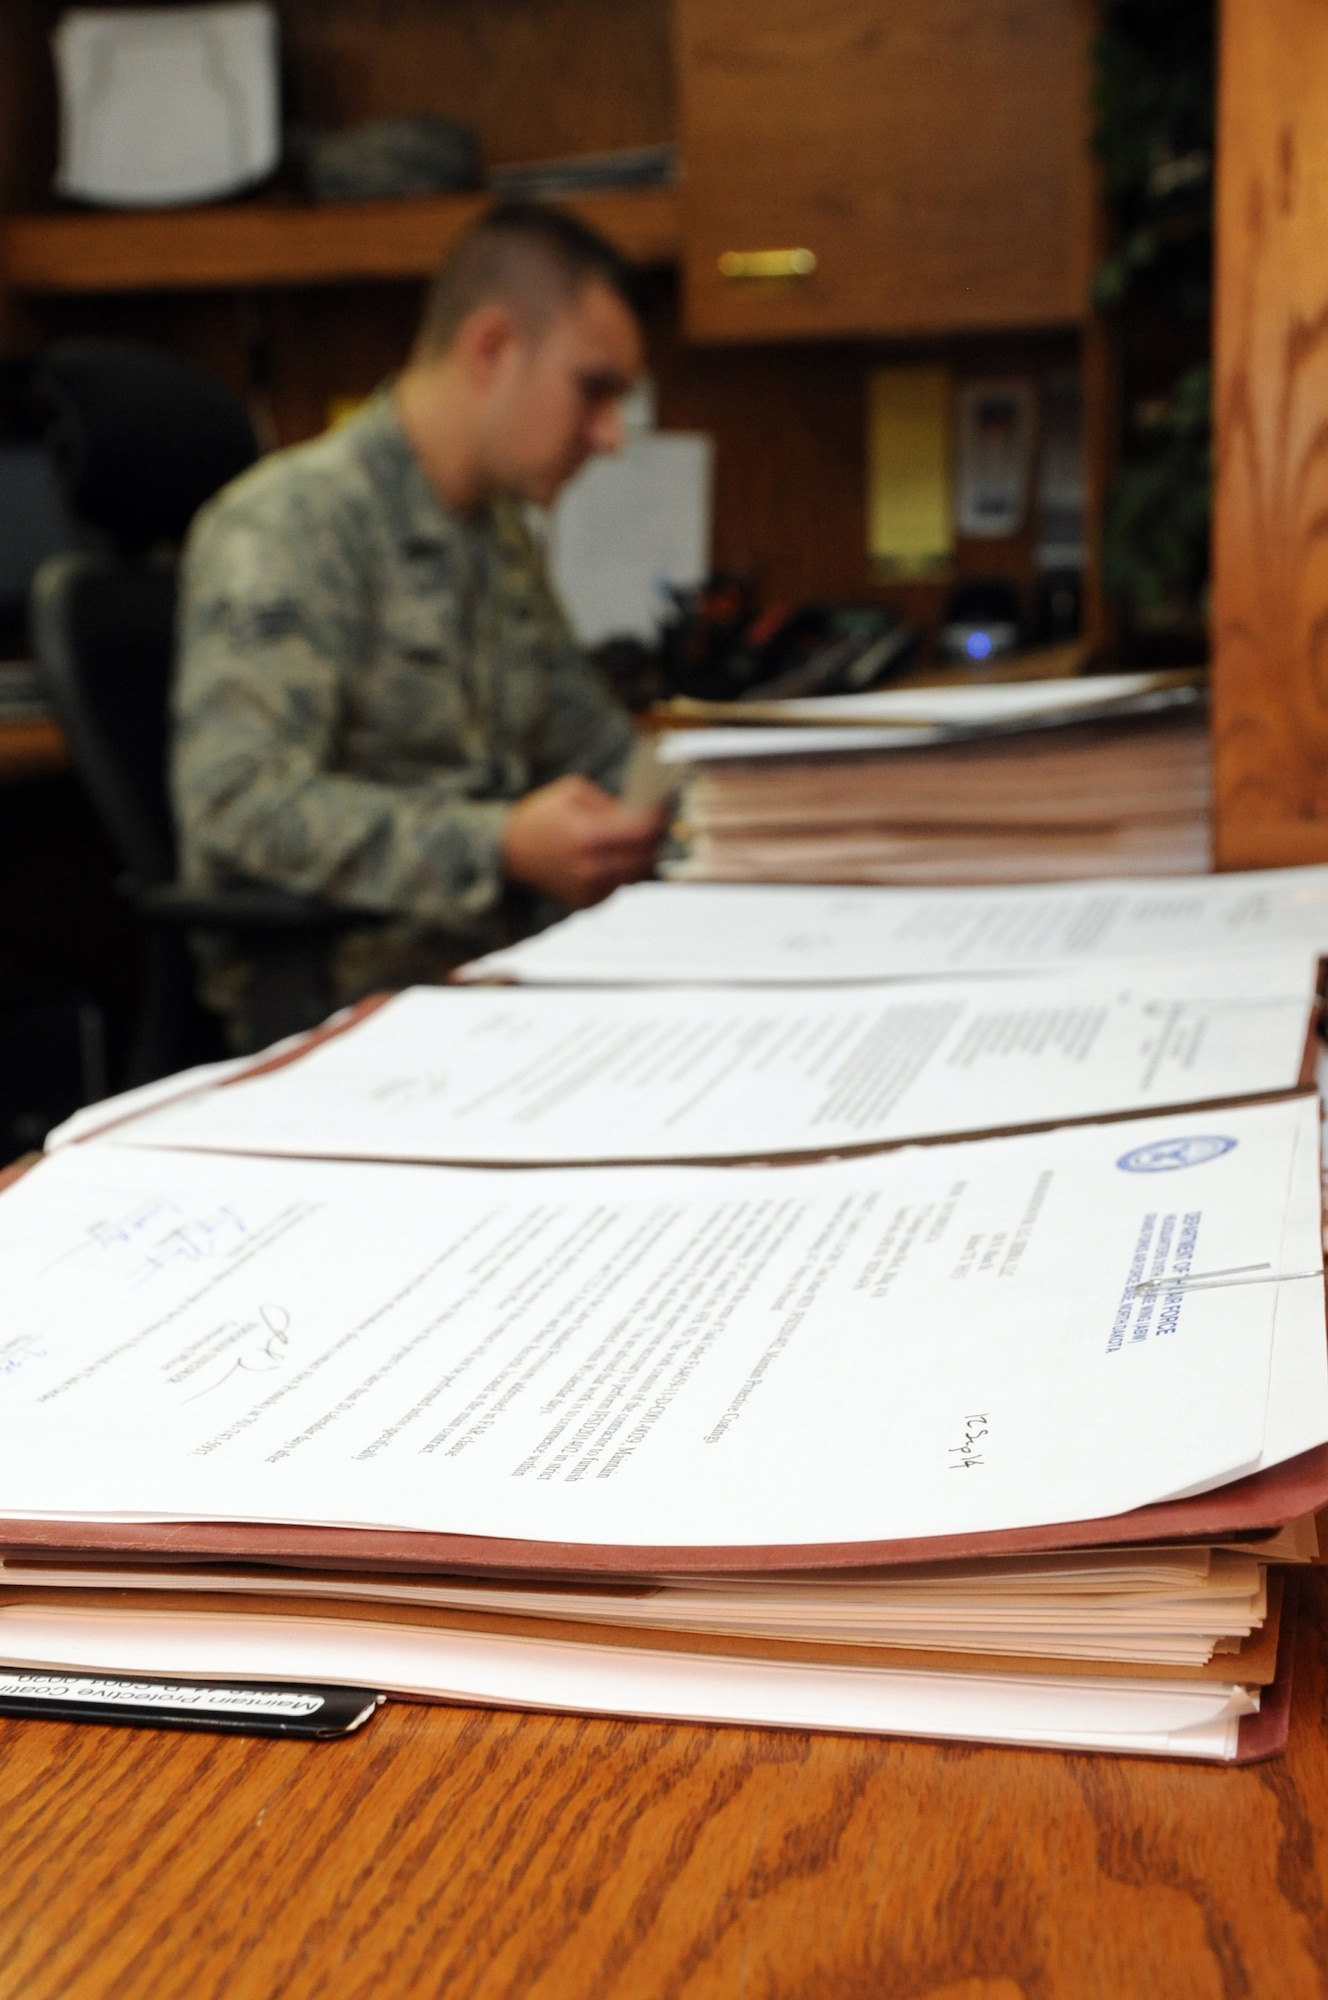 Senior Airman Alexander Ponusky, 319th Contracting Flight contract specialist, reviews paperwork in the 319th CONF office on Grand Forks Air Force Base, N.D., Sept. 25, 2014. The 319th CONF creates and oversees contracts ranging from small purchases of supplies to multimillion dollar construction projects. (U.S. Air Force photo/Staff Sgt. David Dobrydney)